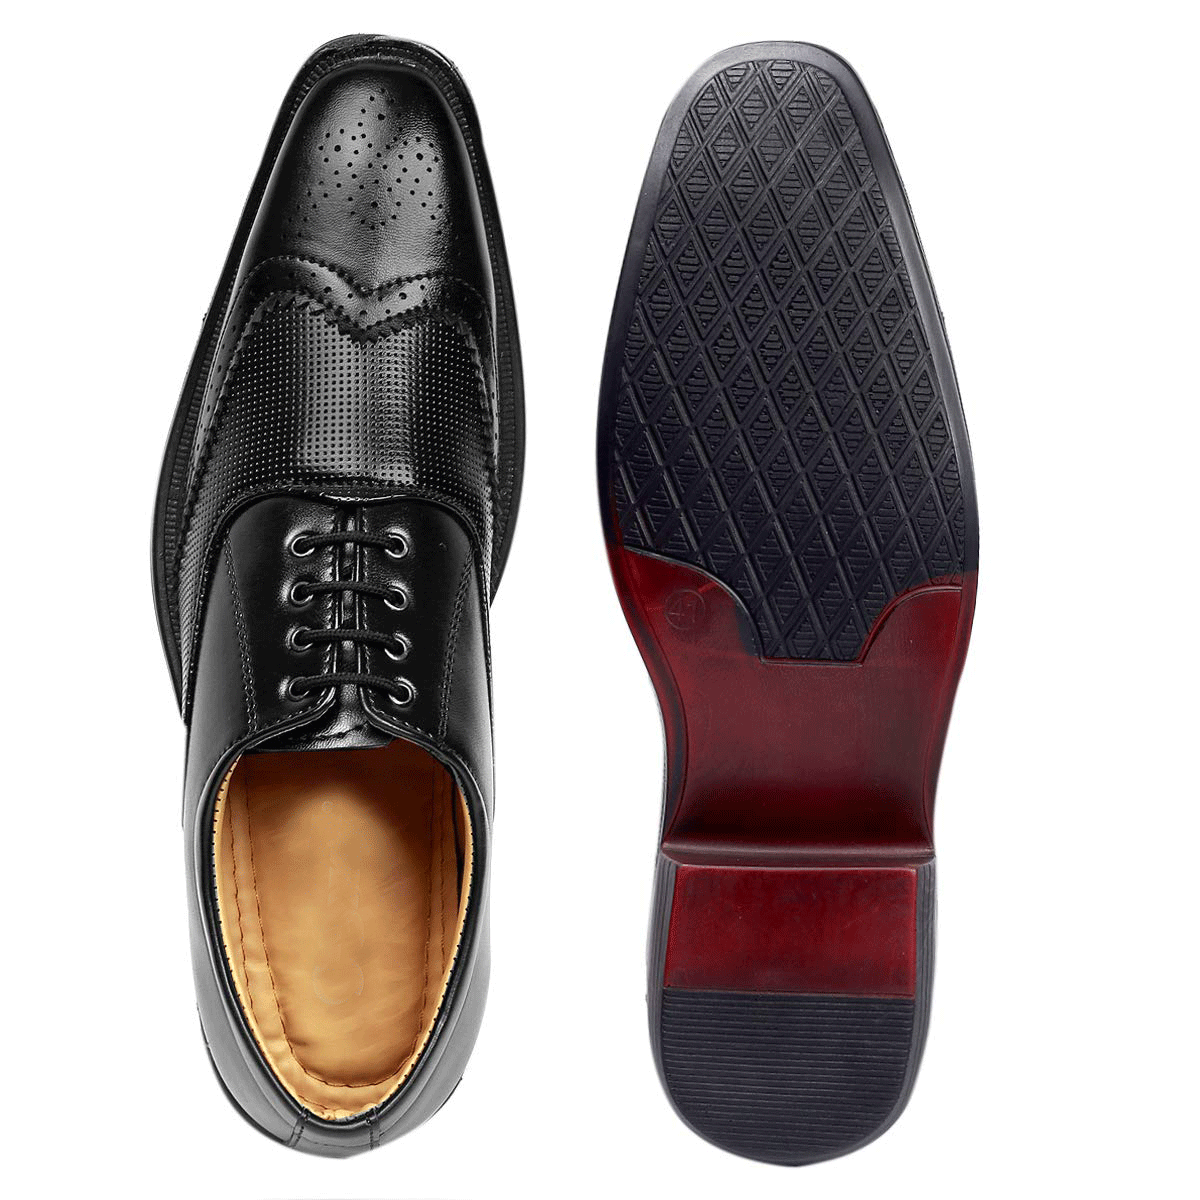 Height Increasing Black Casual And Formal Lace-Up Shoes For Men-JonasParamount